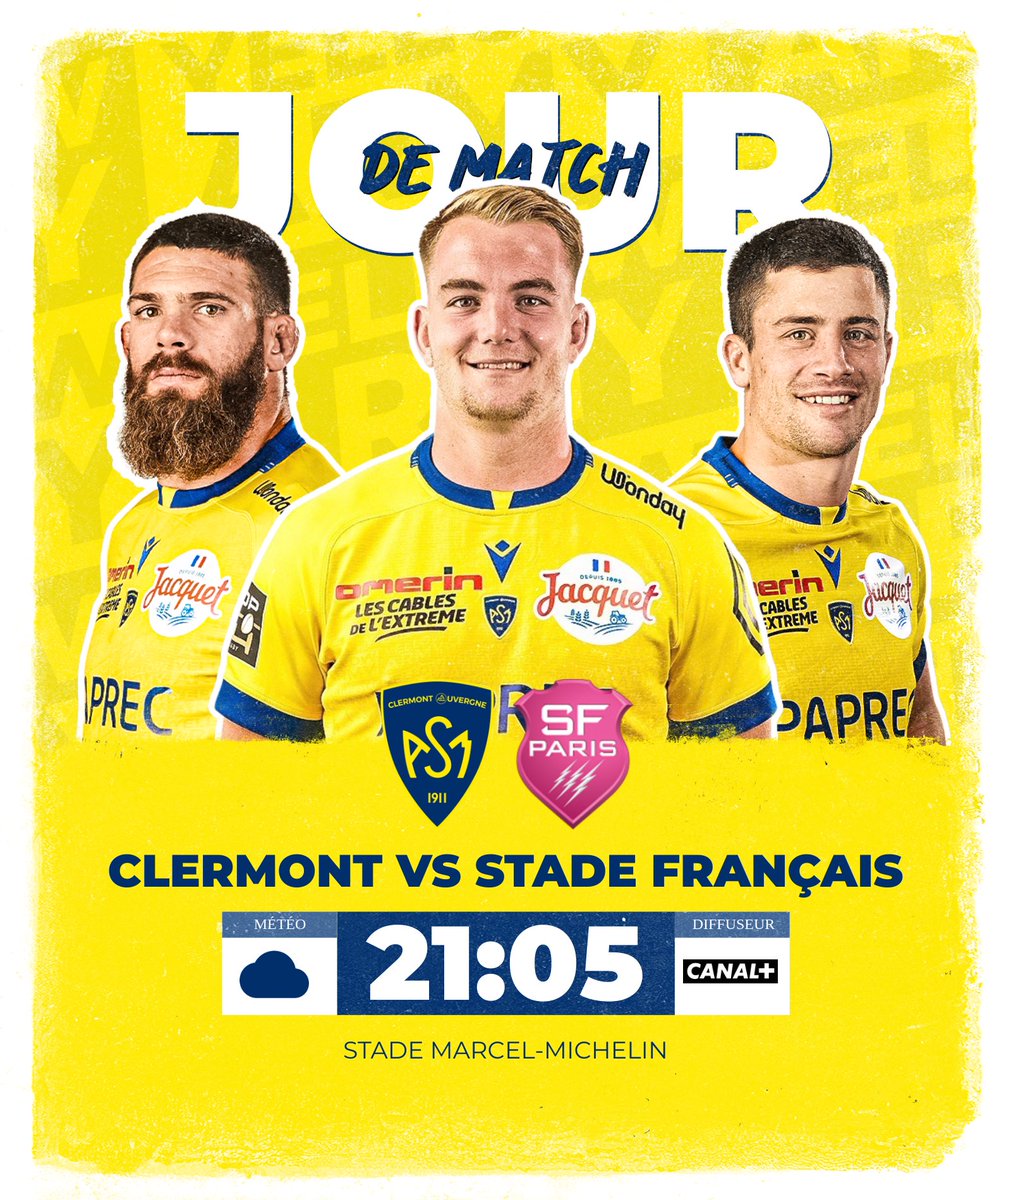 🟡🔵 𝗝𝗢𝗨𝗥 𝗗𝗘 𝗠𝗔𝗧𝗖𝗛 👊🏻 🆚 @SFParisRugby 🏉 @top14rugby 📍Stade Marcel-Michelin ⏱21h05 (coup d'envoi) 🎫 billetterie.asm-rugby.com/fr 📺 @canalplus 💨14-16° 👉🏻 #ASMSFP 🌋🌸 | #YellowArmy